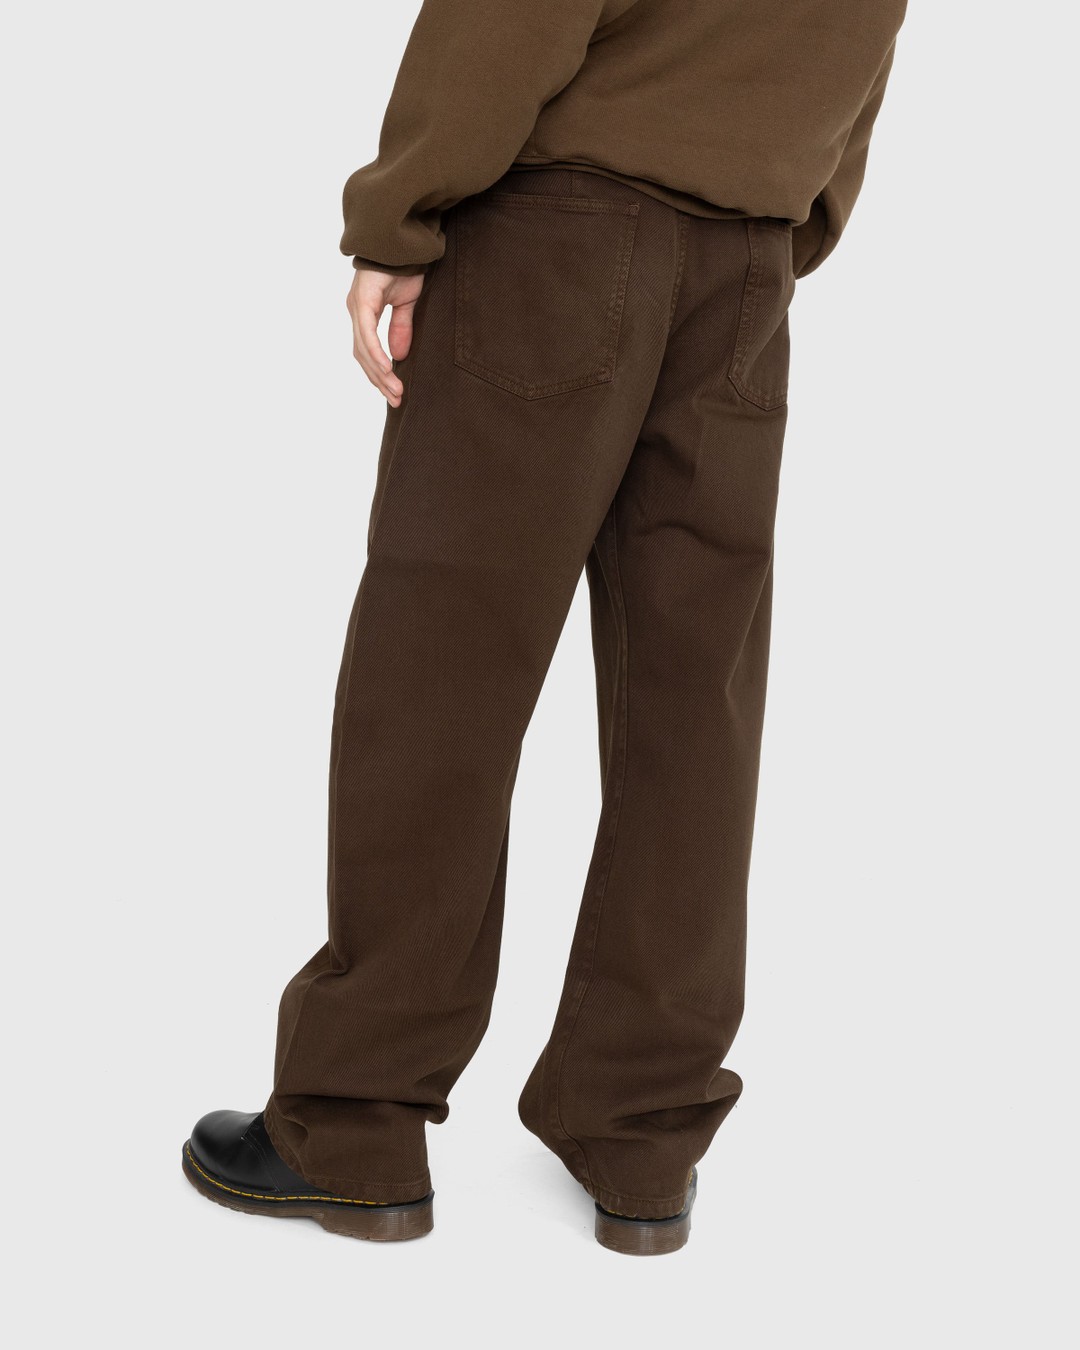 Lemaire – Twisted Belted Casual Pant - Pants - Brown - Image 3